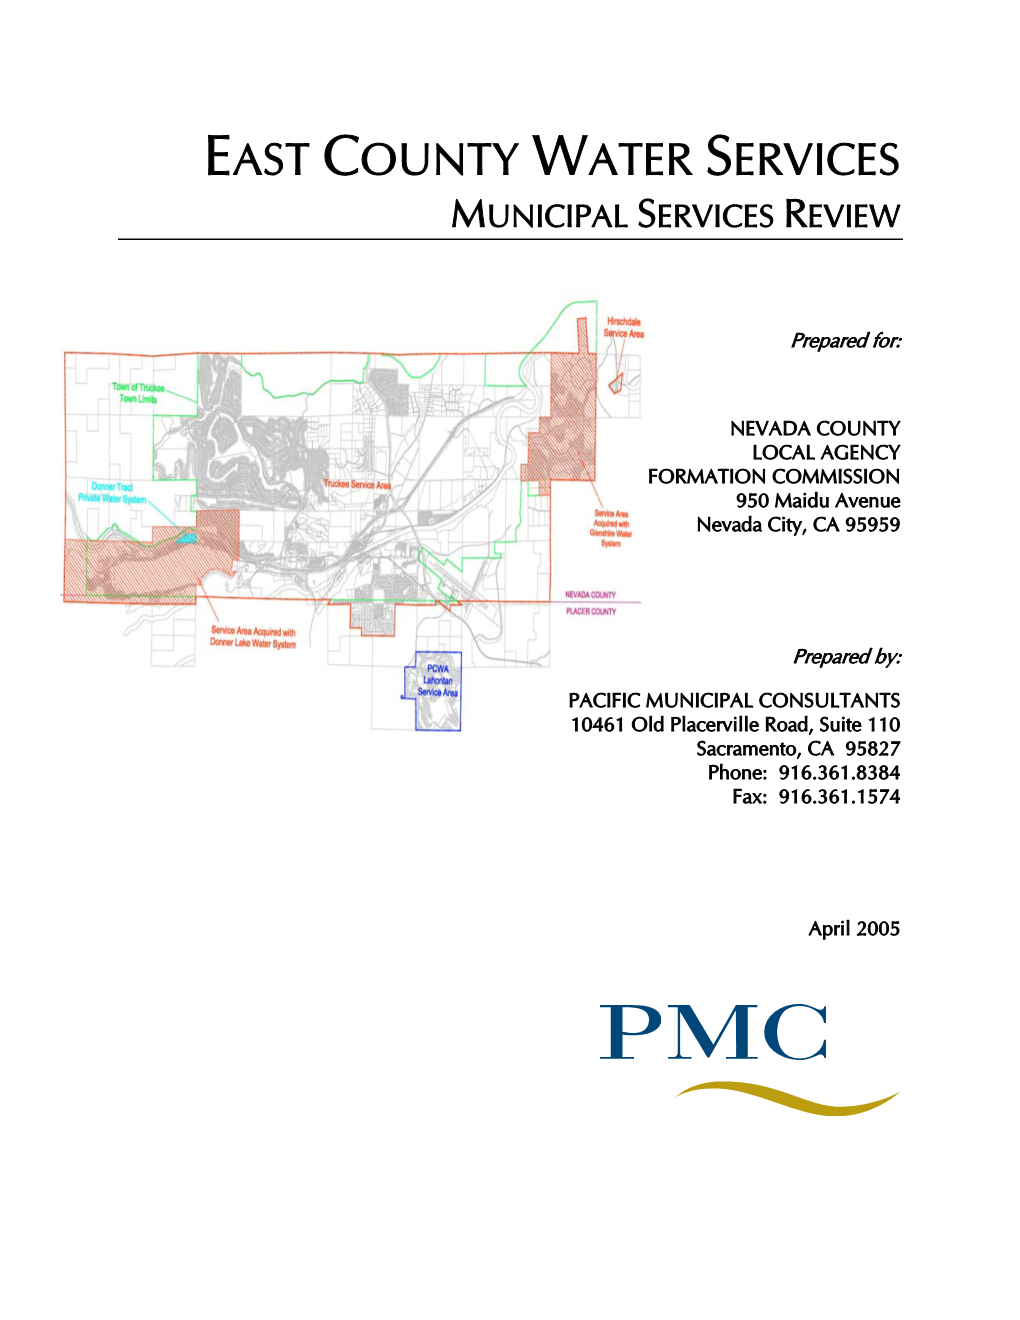 East County Water Services Municipal Services Review